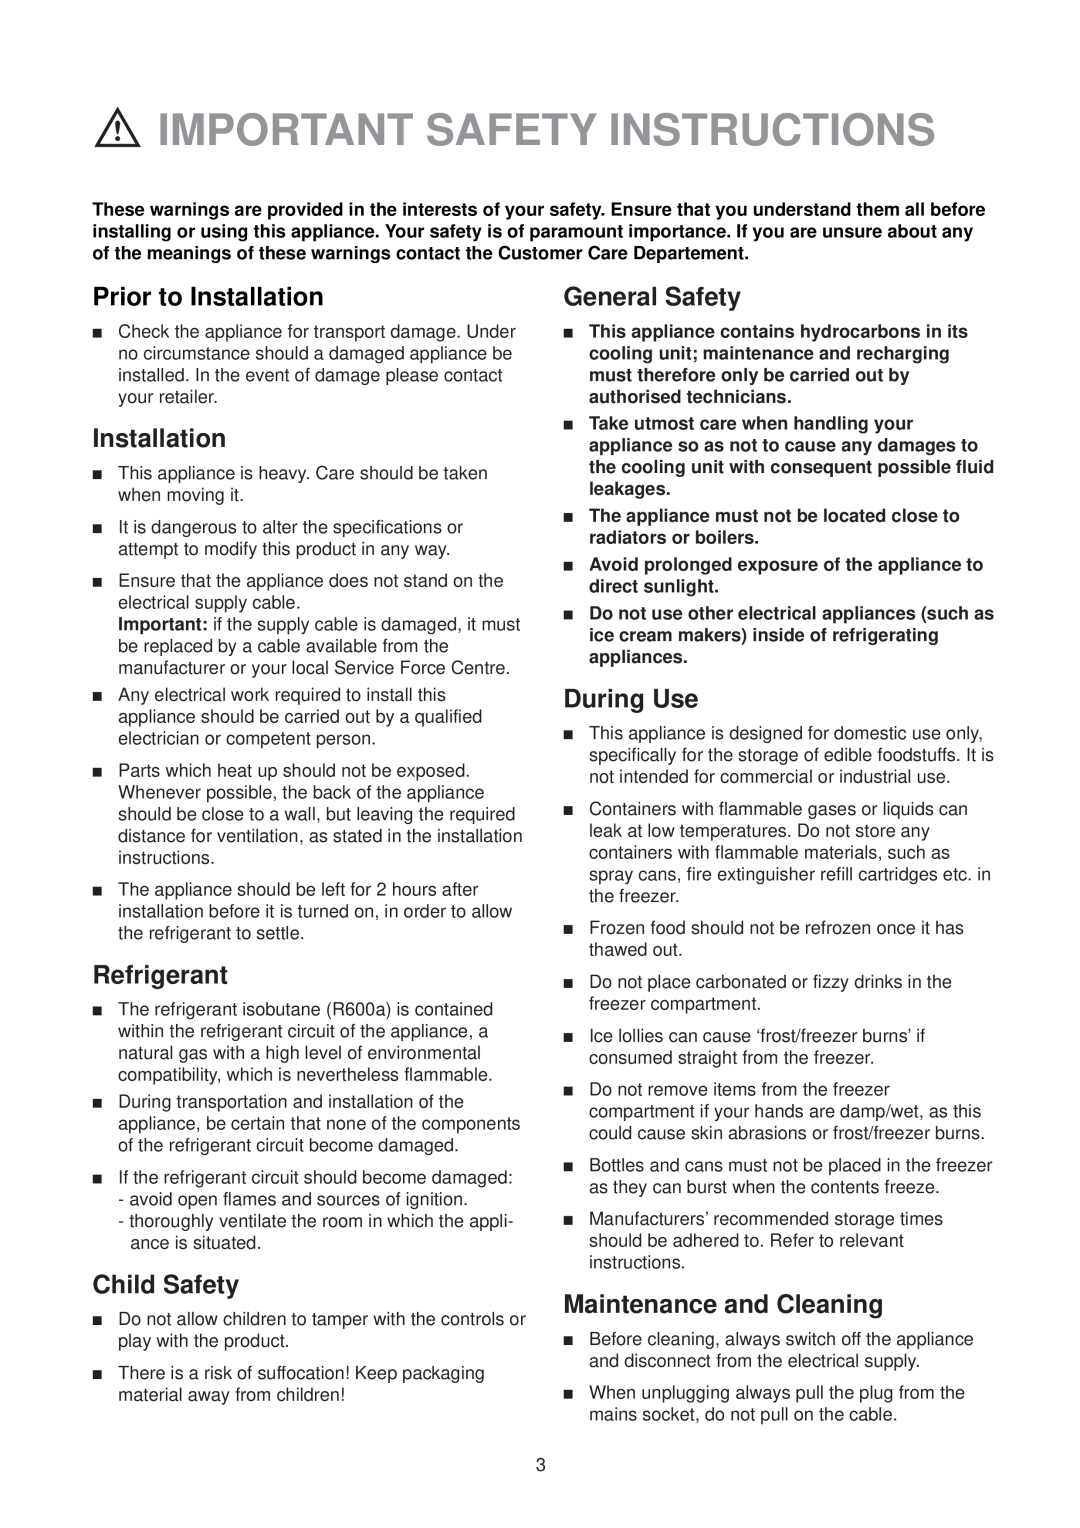 Electrolux EU 6233 manual Important Safety Instructions, The appliance must not be located close to radiators or boilers 